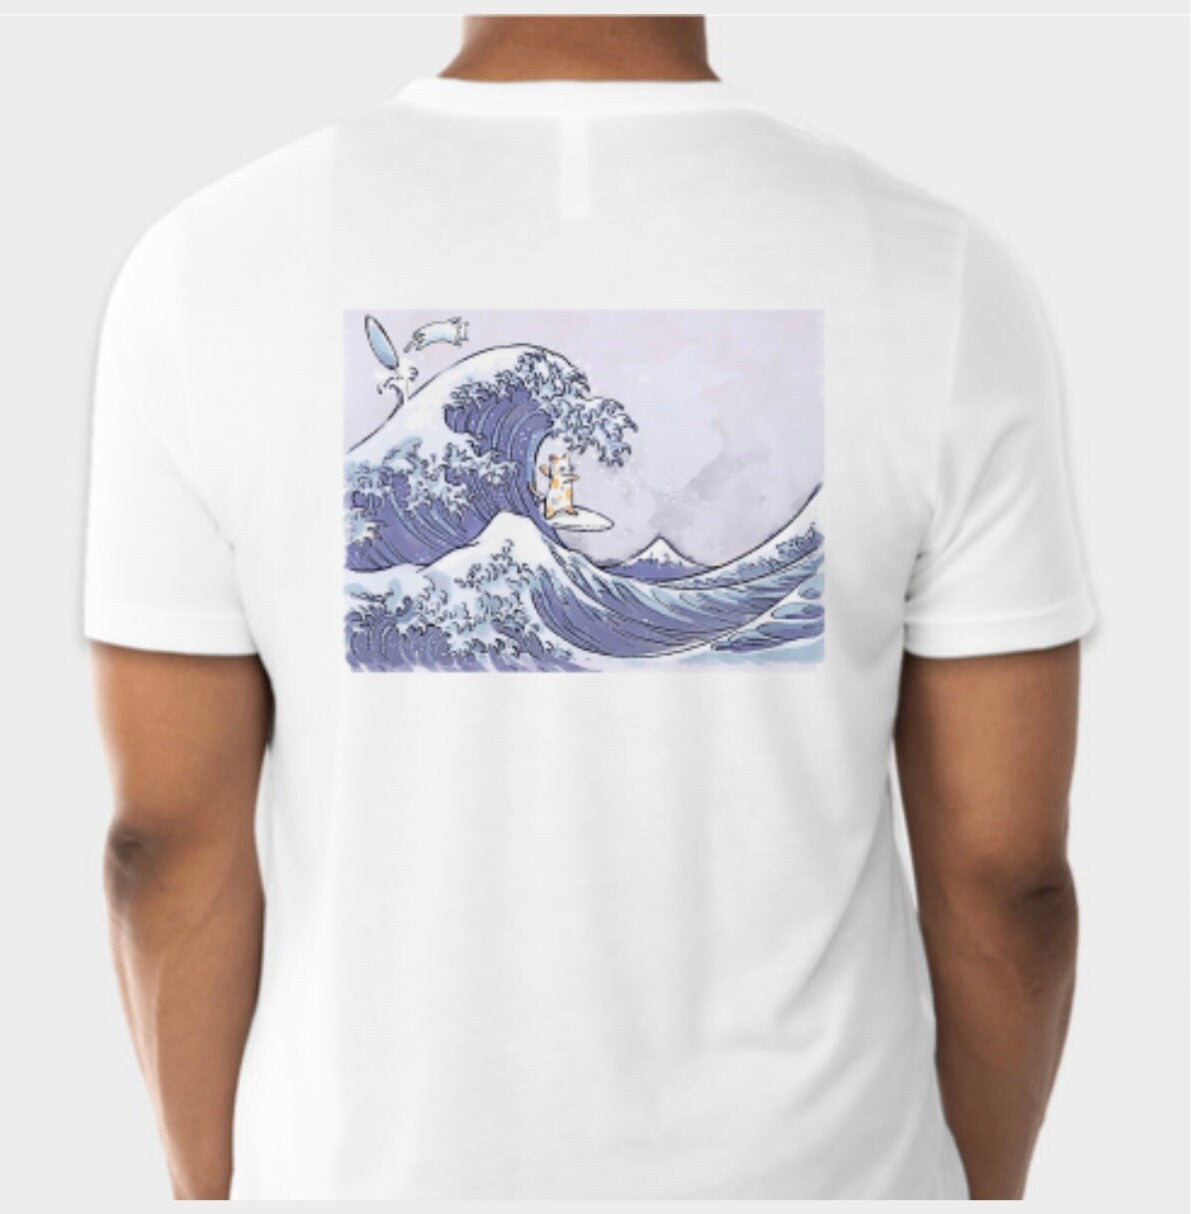 Surf's Up - T-Shirts